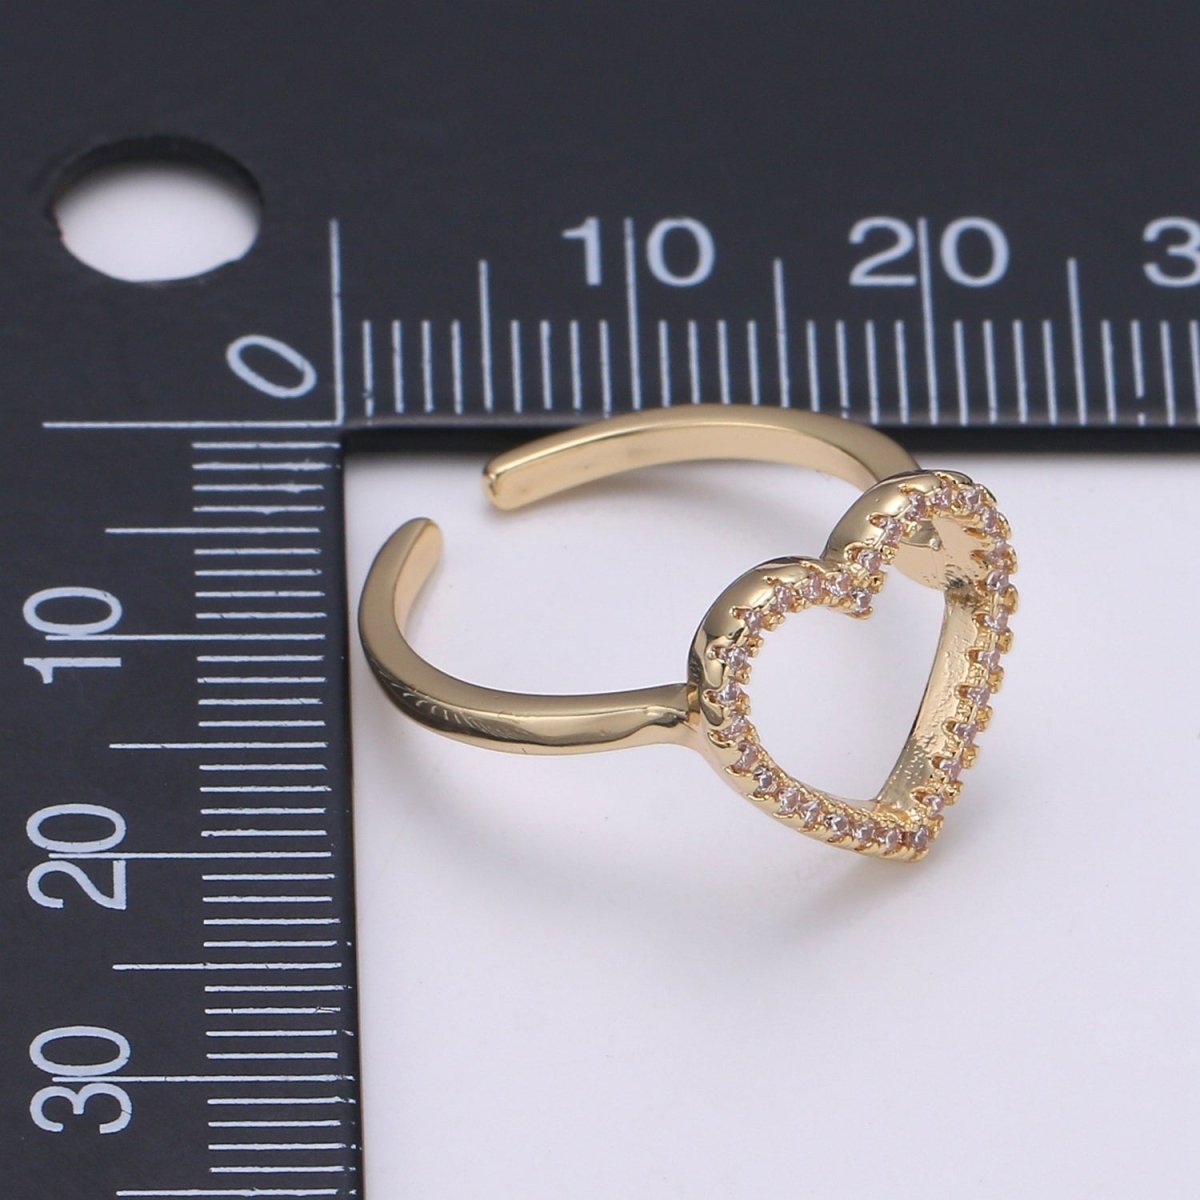 Gold Heart Ring, Love Ring, Open Heart Ring, Micro Pave Gold Stacking Ring, Adjustable Ring, Minimalist Heart Ring, Gift for her - DLUXCA